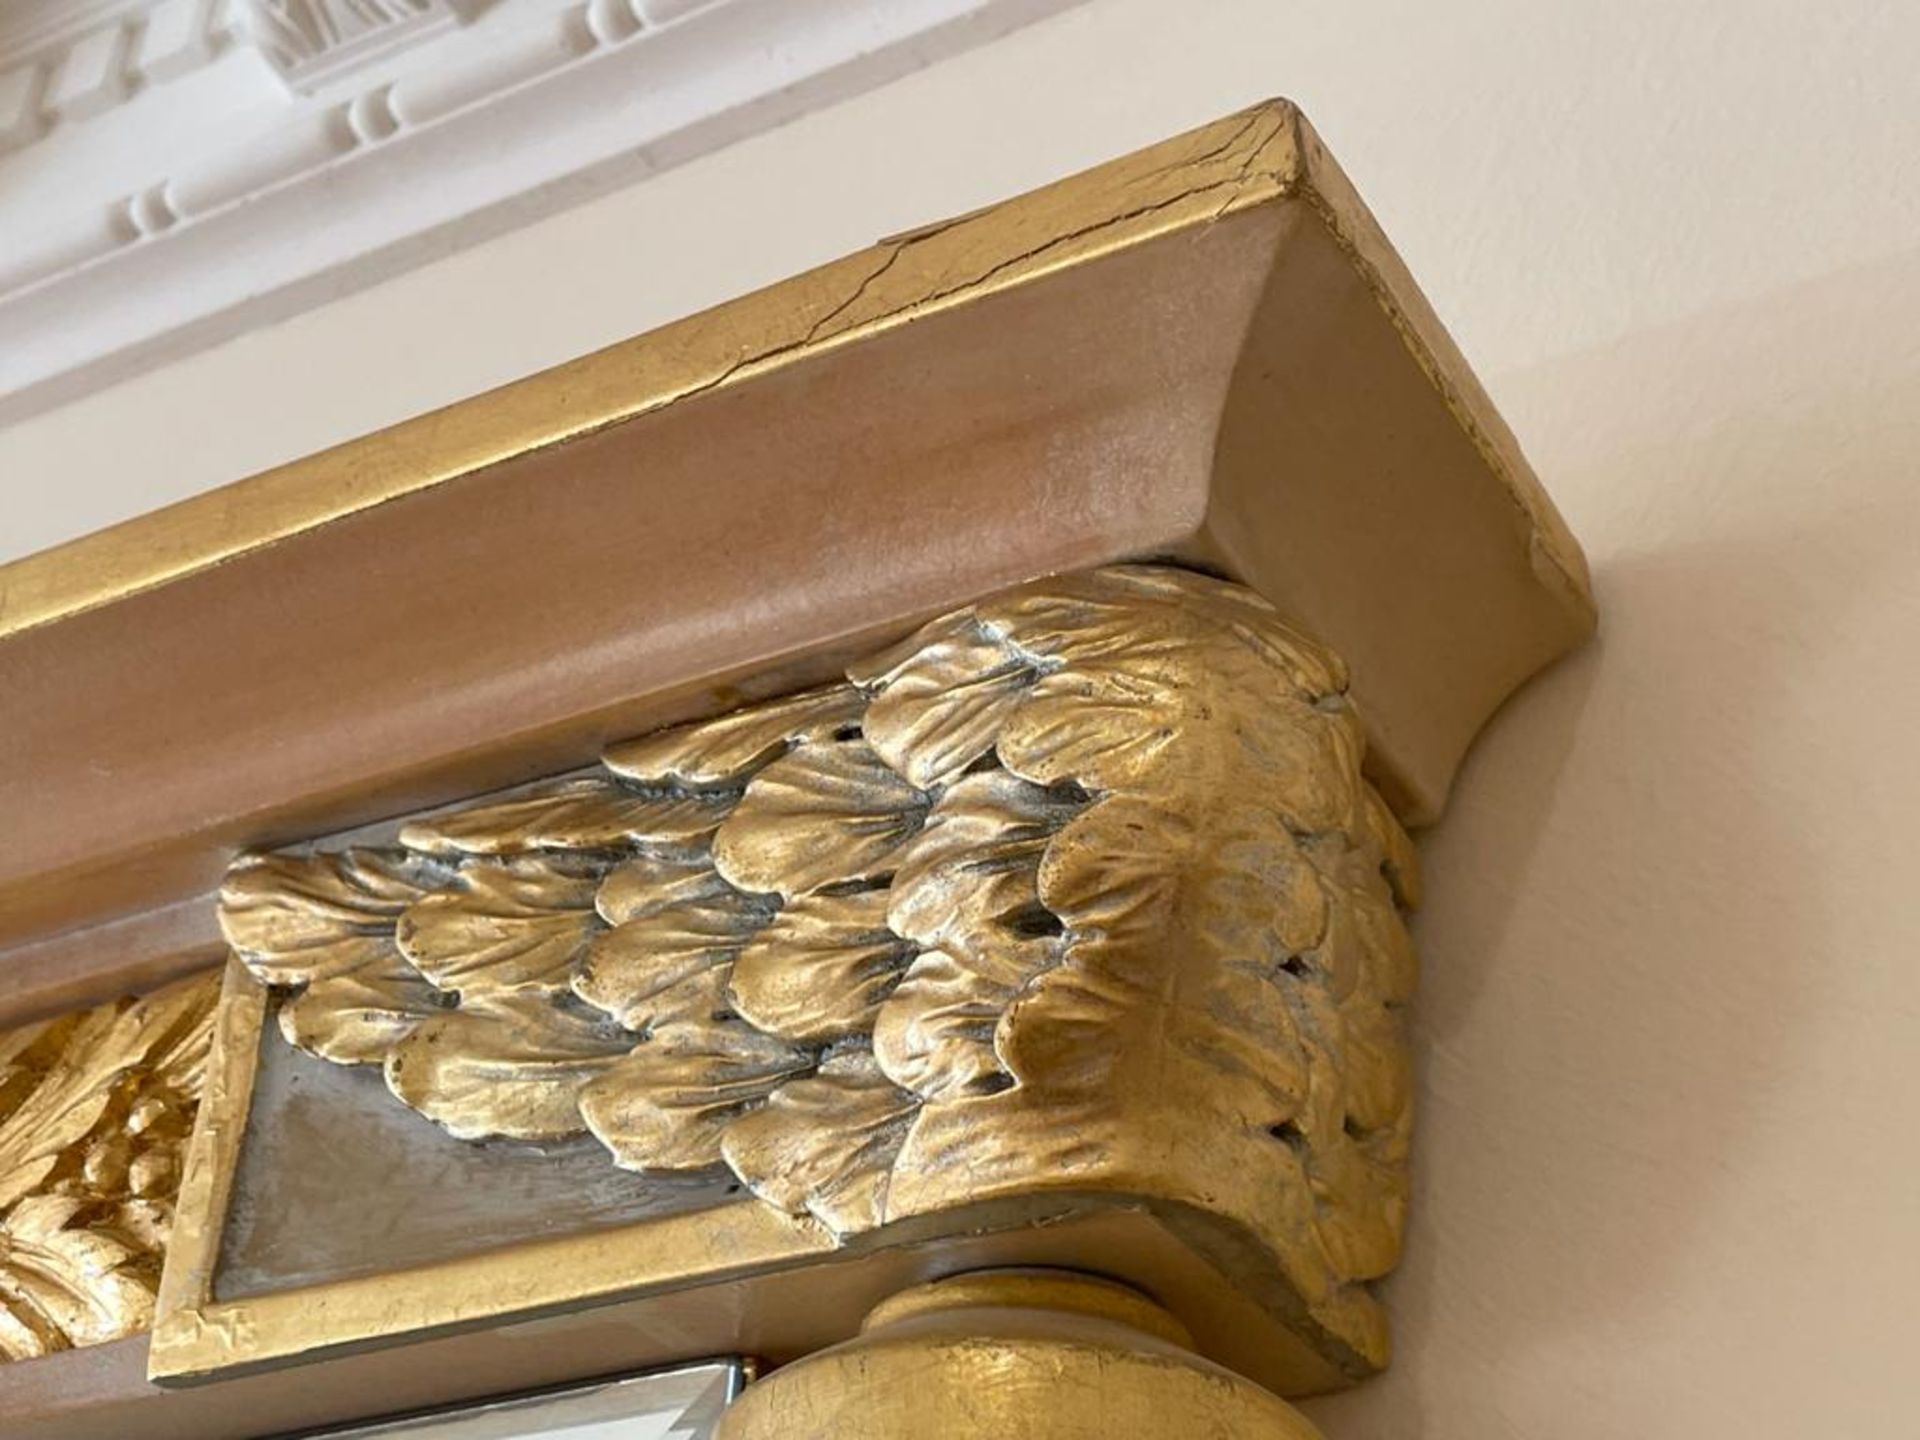 1 x Ornate Overmantel Wall Mirror With Fine Carving Work and Moulded Cornice - Features a Bevelled - Image 6 of 9